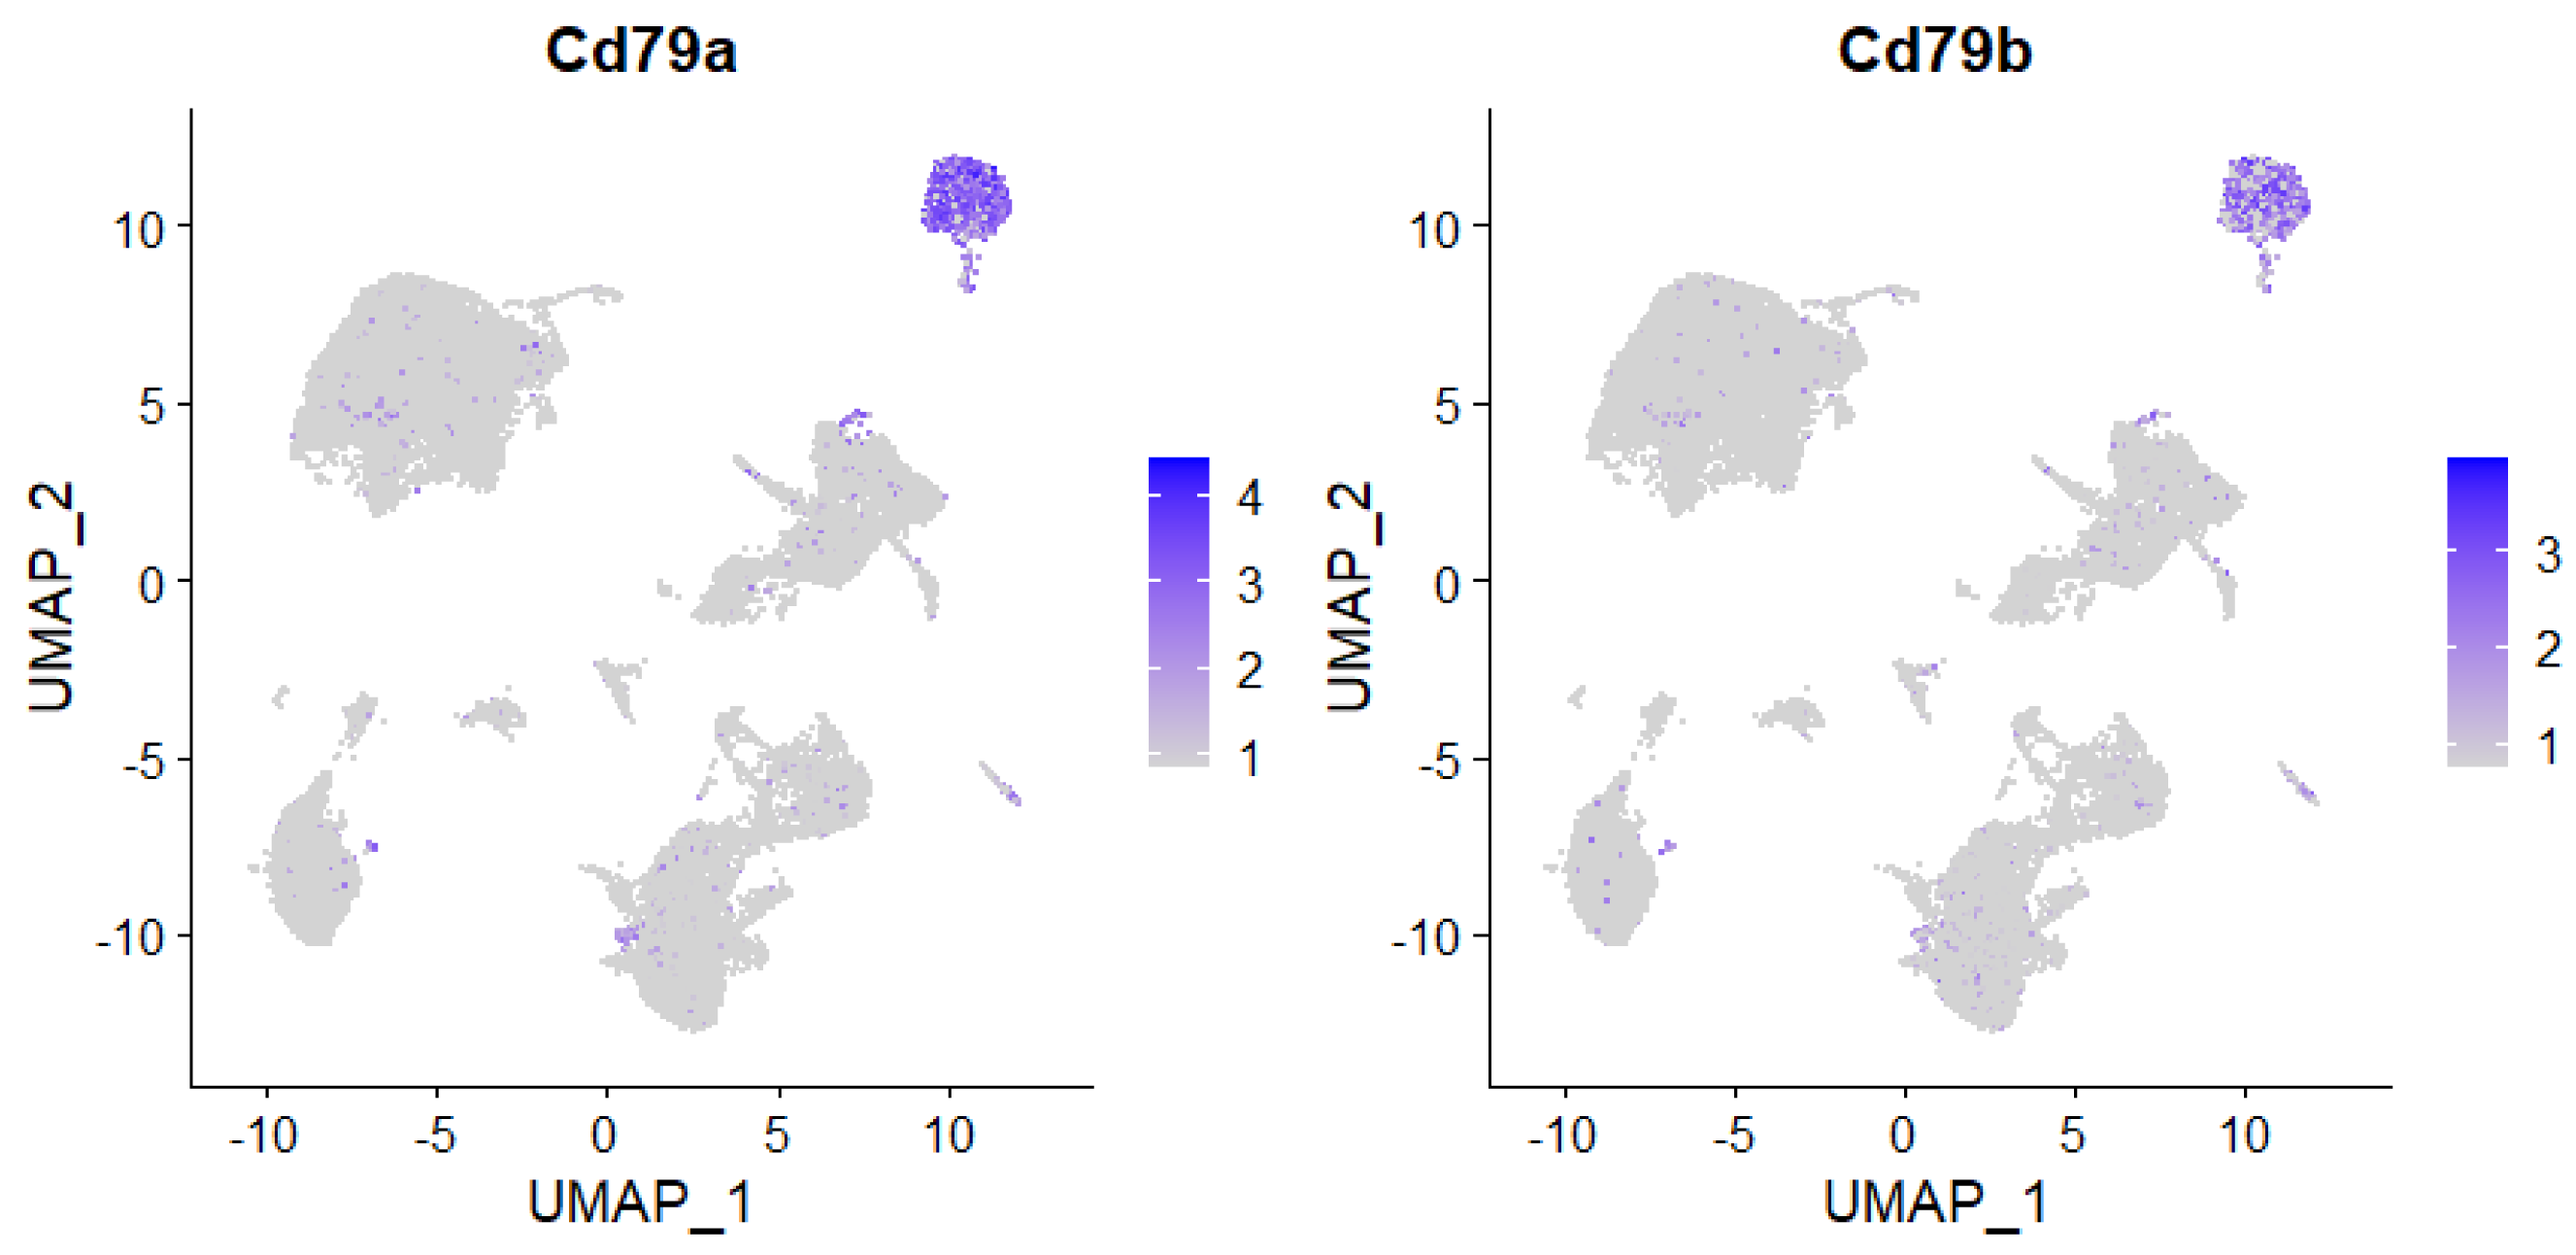 The image shows a Seurat analysis of scRNA-Seq data. B cells are identifiable via expression of their specific markers